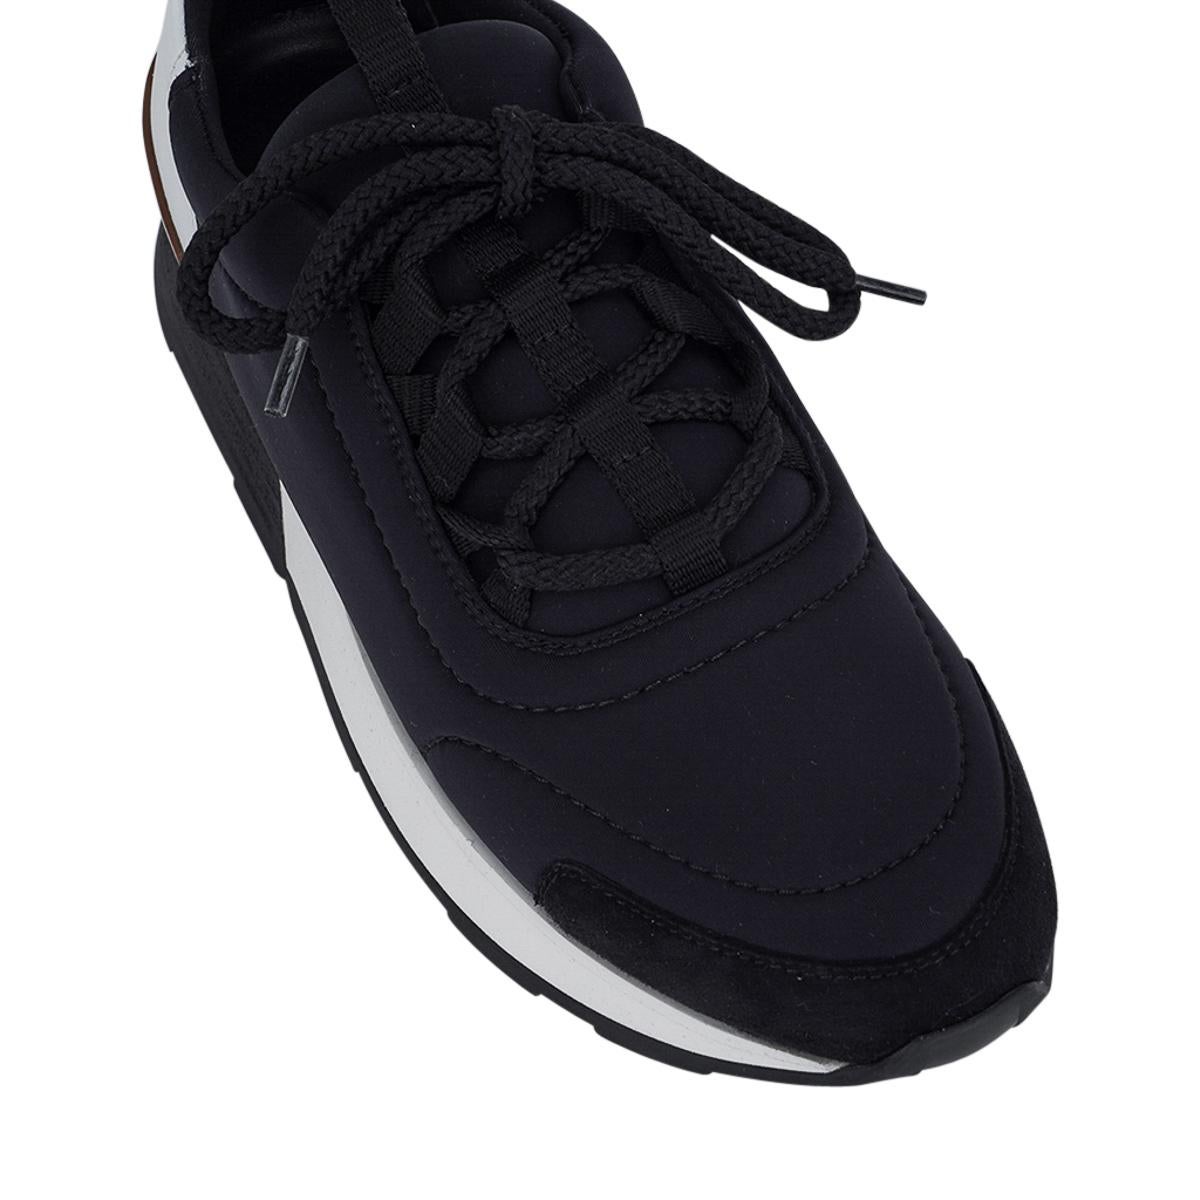 Mightychic offers a pair of Hermes Miles Sneakers featured in Black and White. 
Accentuated with Brown rear detail.
Technical canvas with goatskin suede toe and rear White calfskin.
Almond toe and lightweight for great comfort.
Comes with sleeper